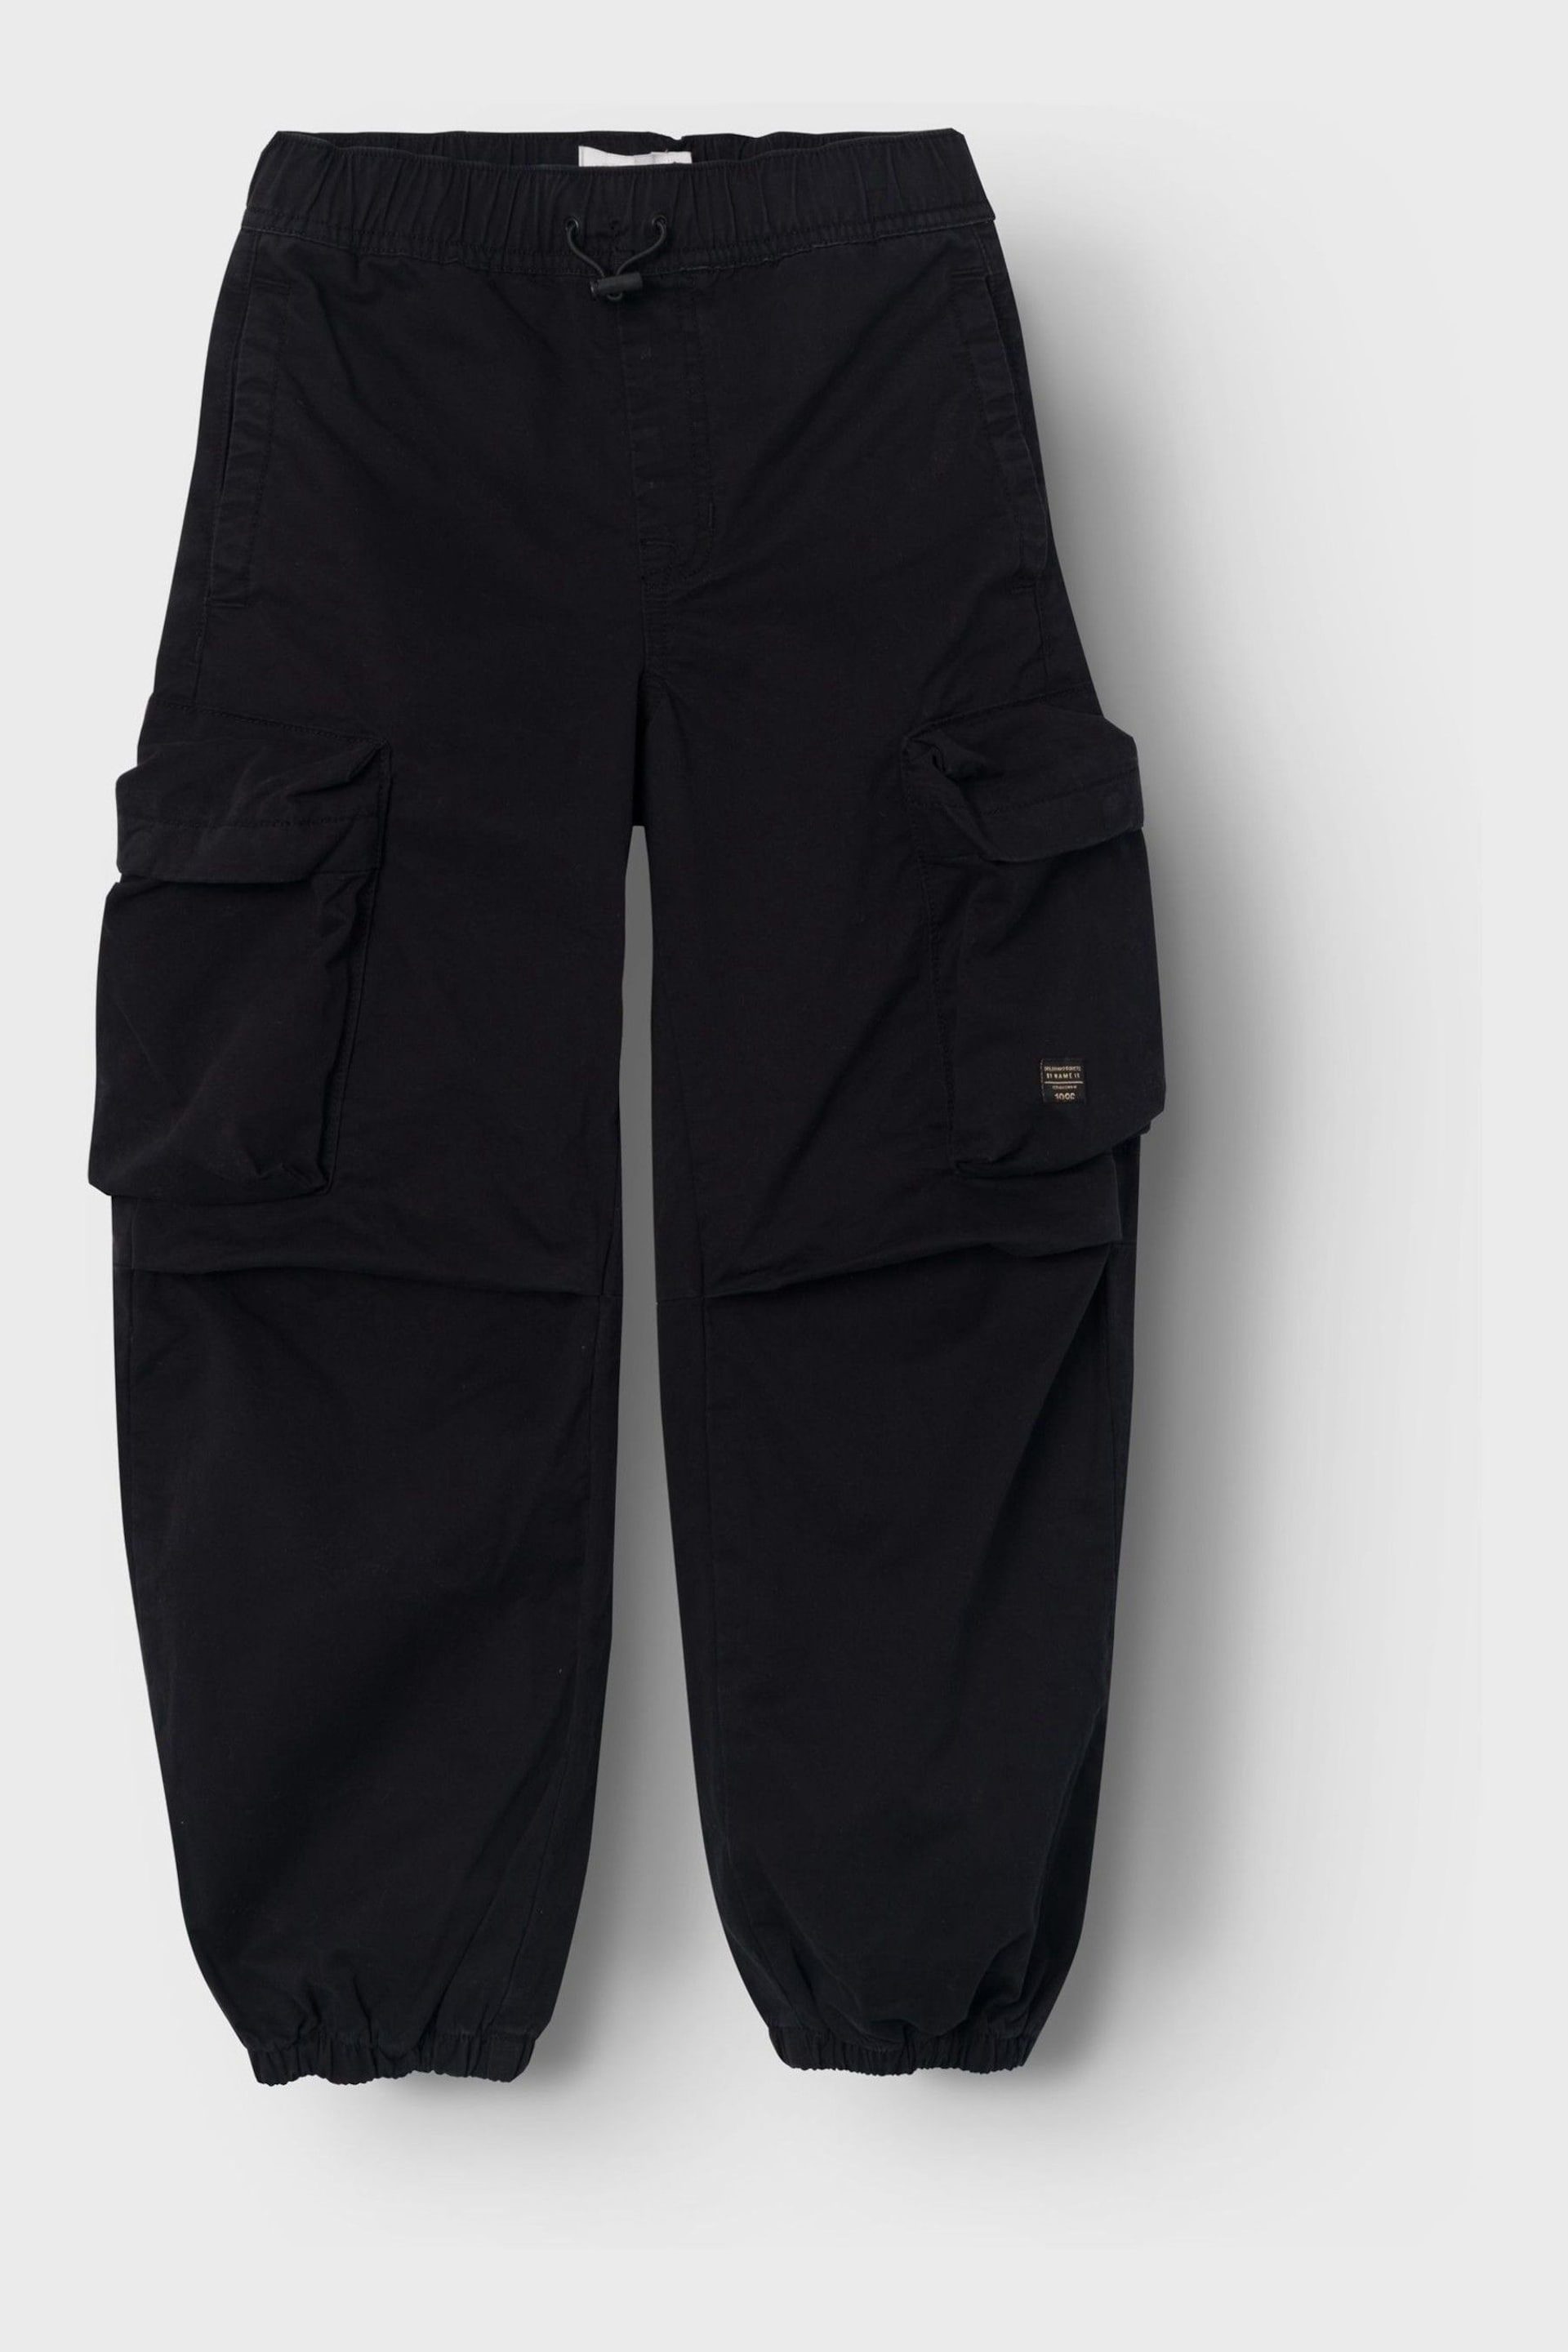 Name It Black Boys Parachute Cargo Trousers - Image 3 of 5